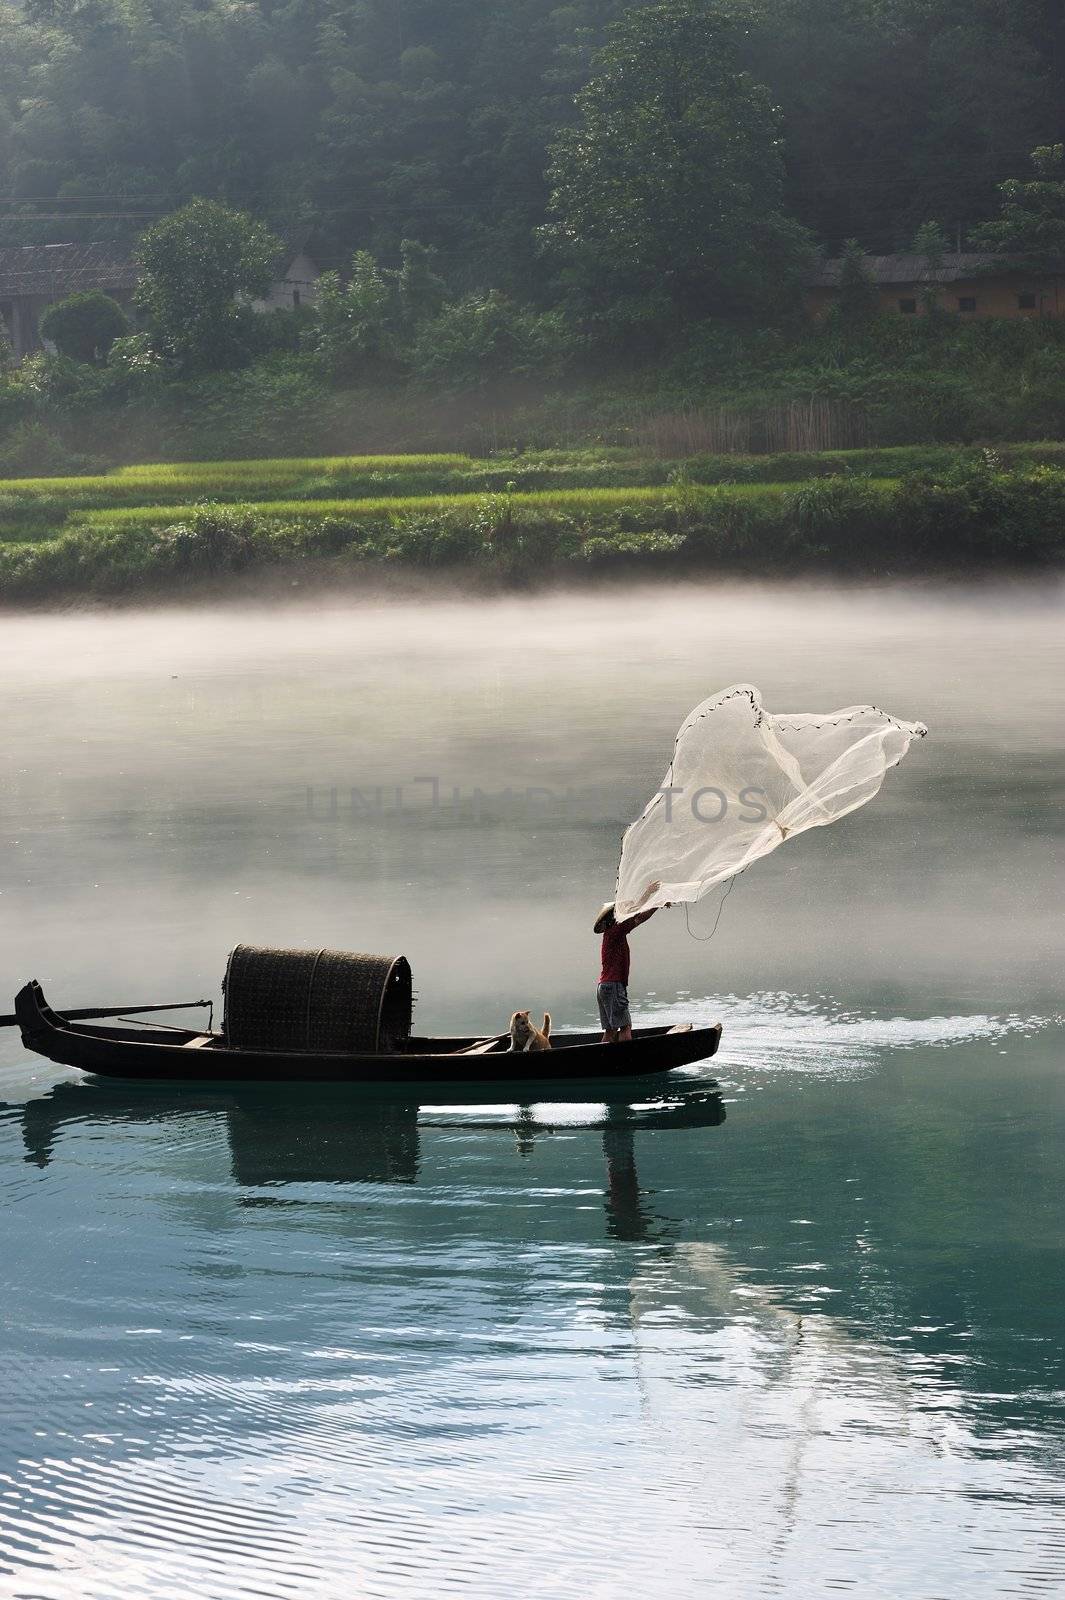 A fisherman casting his net from the boat on the river